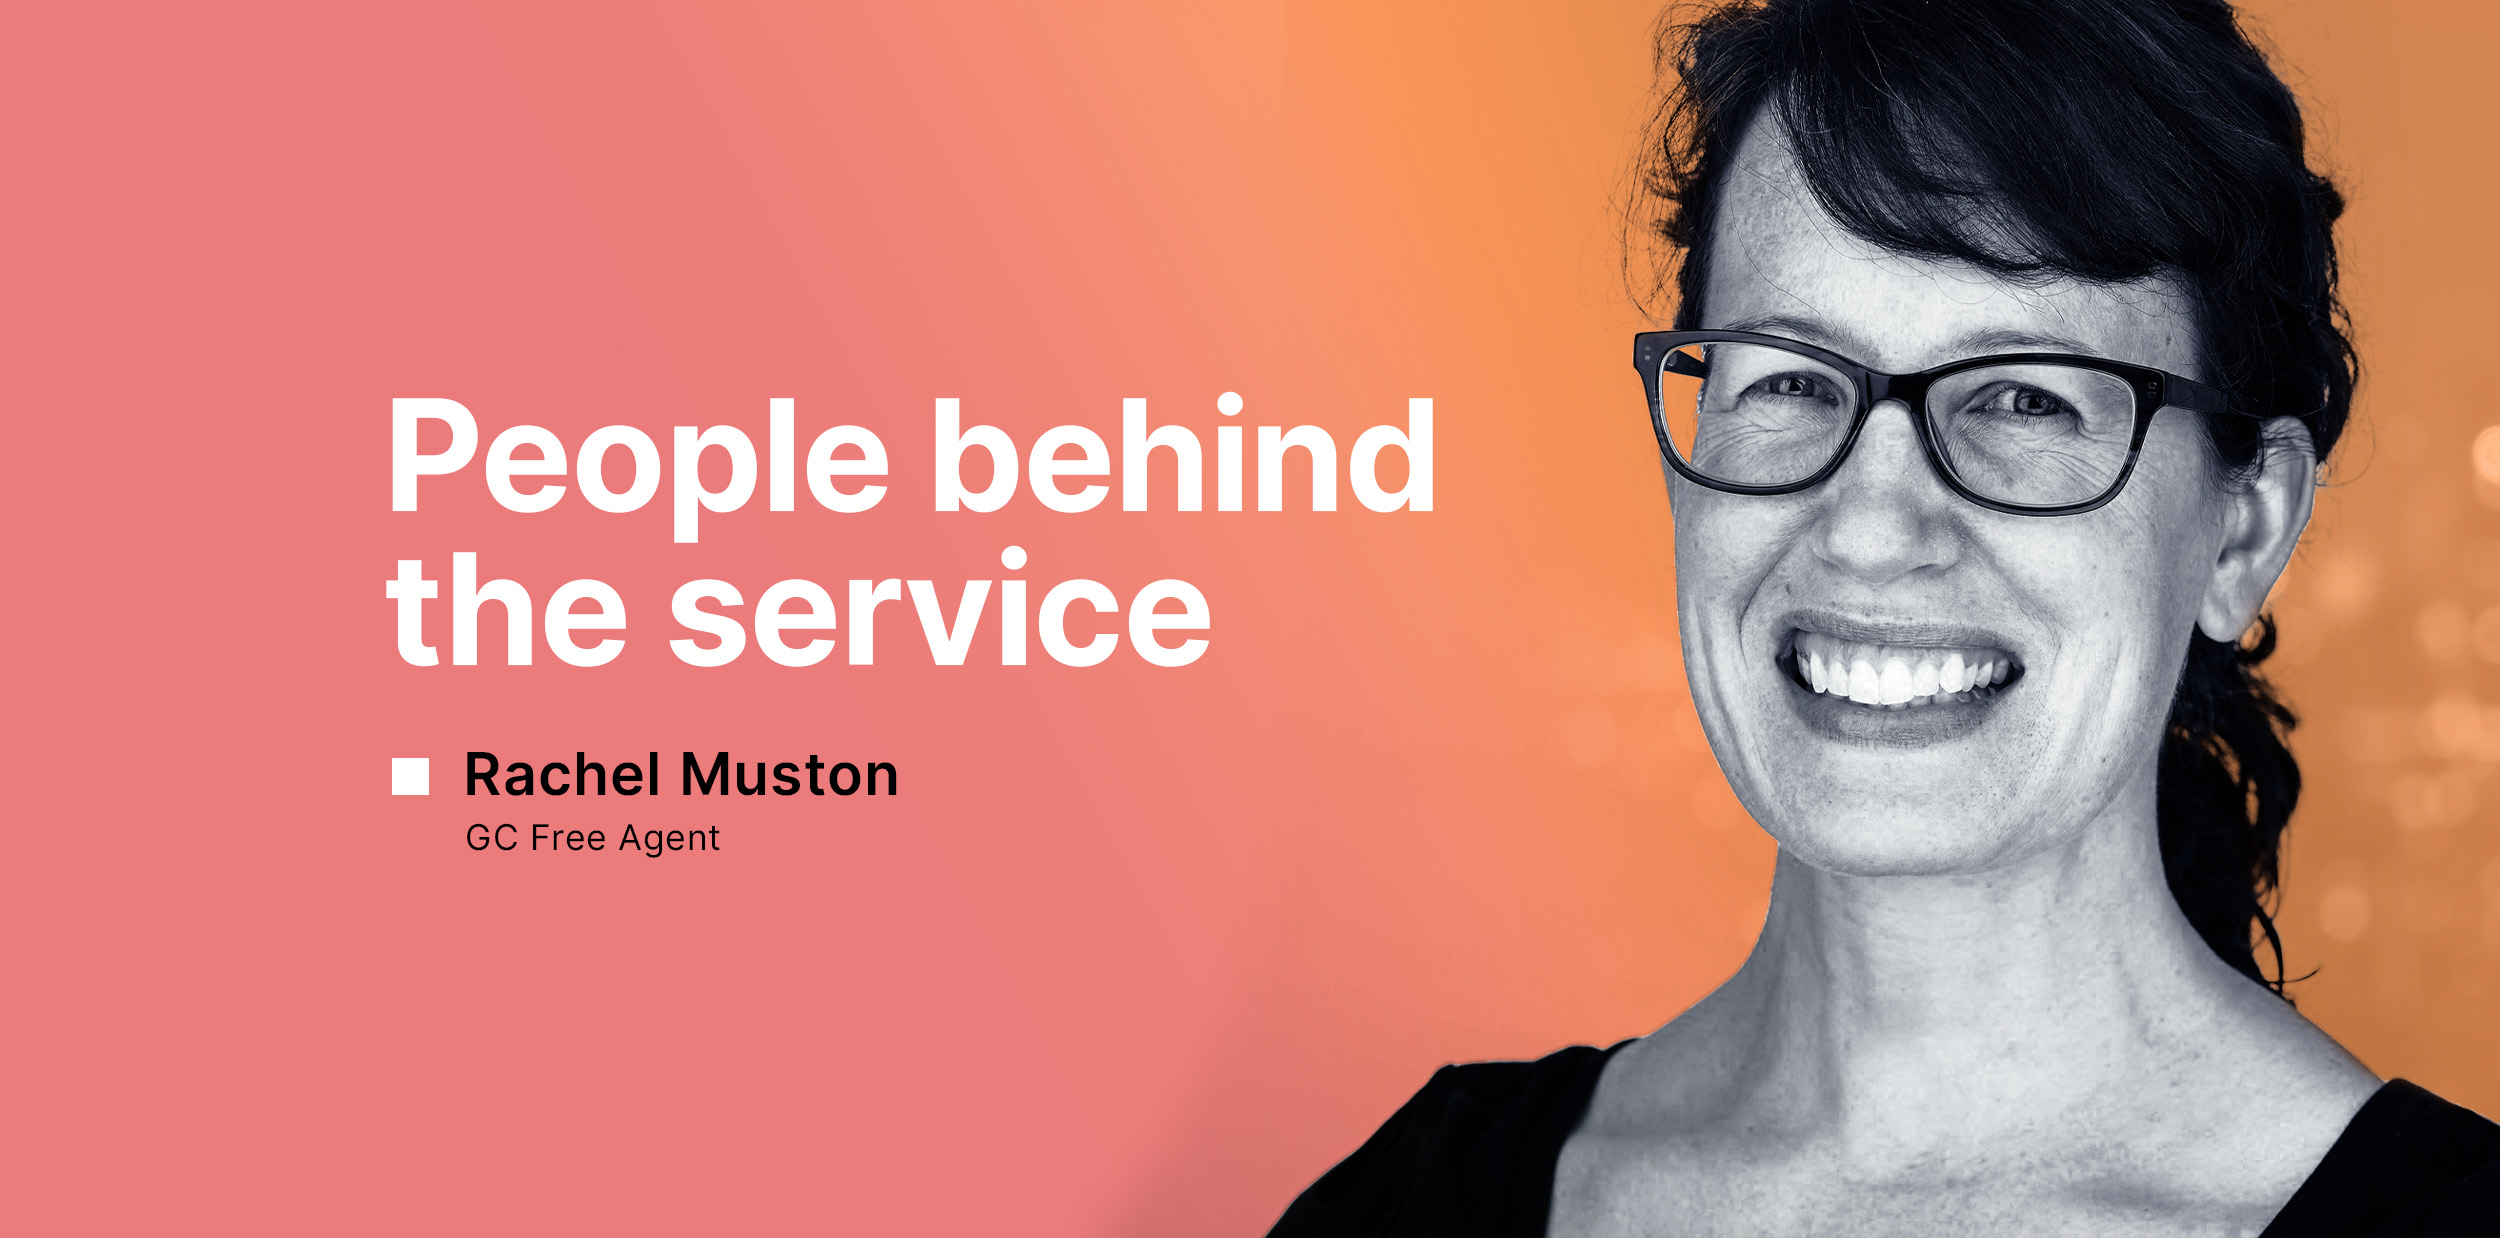 Photograph of public servant Rachel Muston smiling for “People behind the service” series.